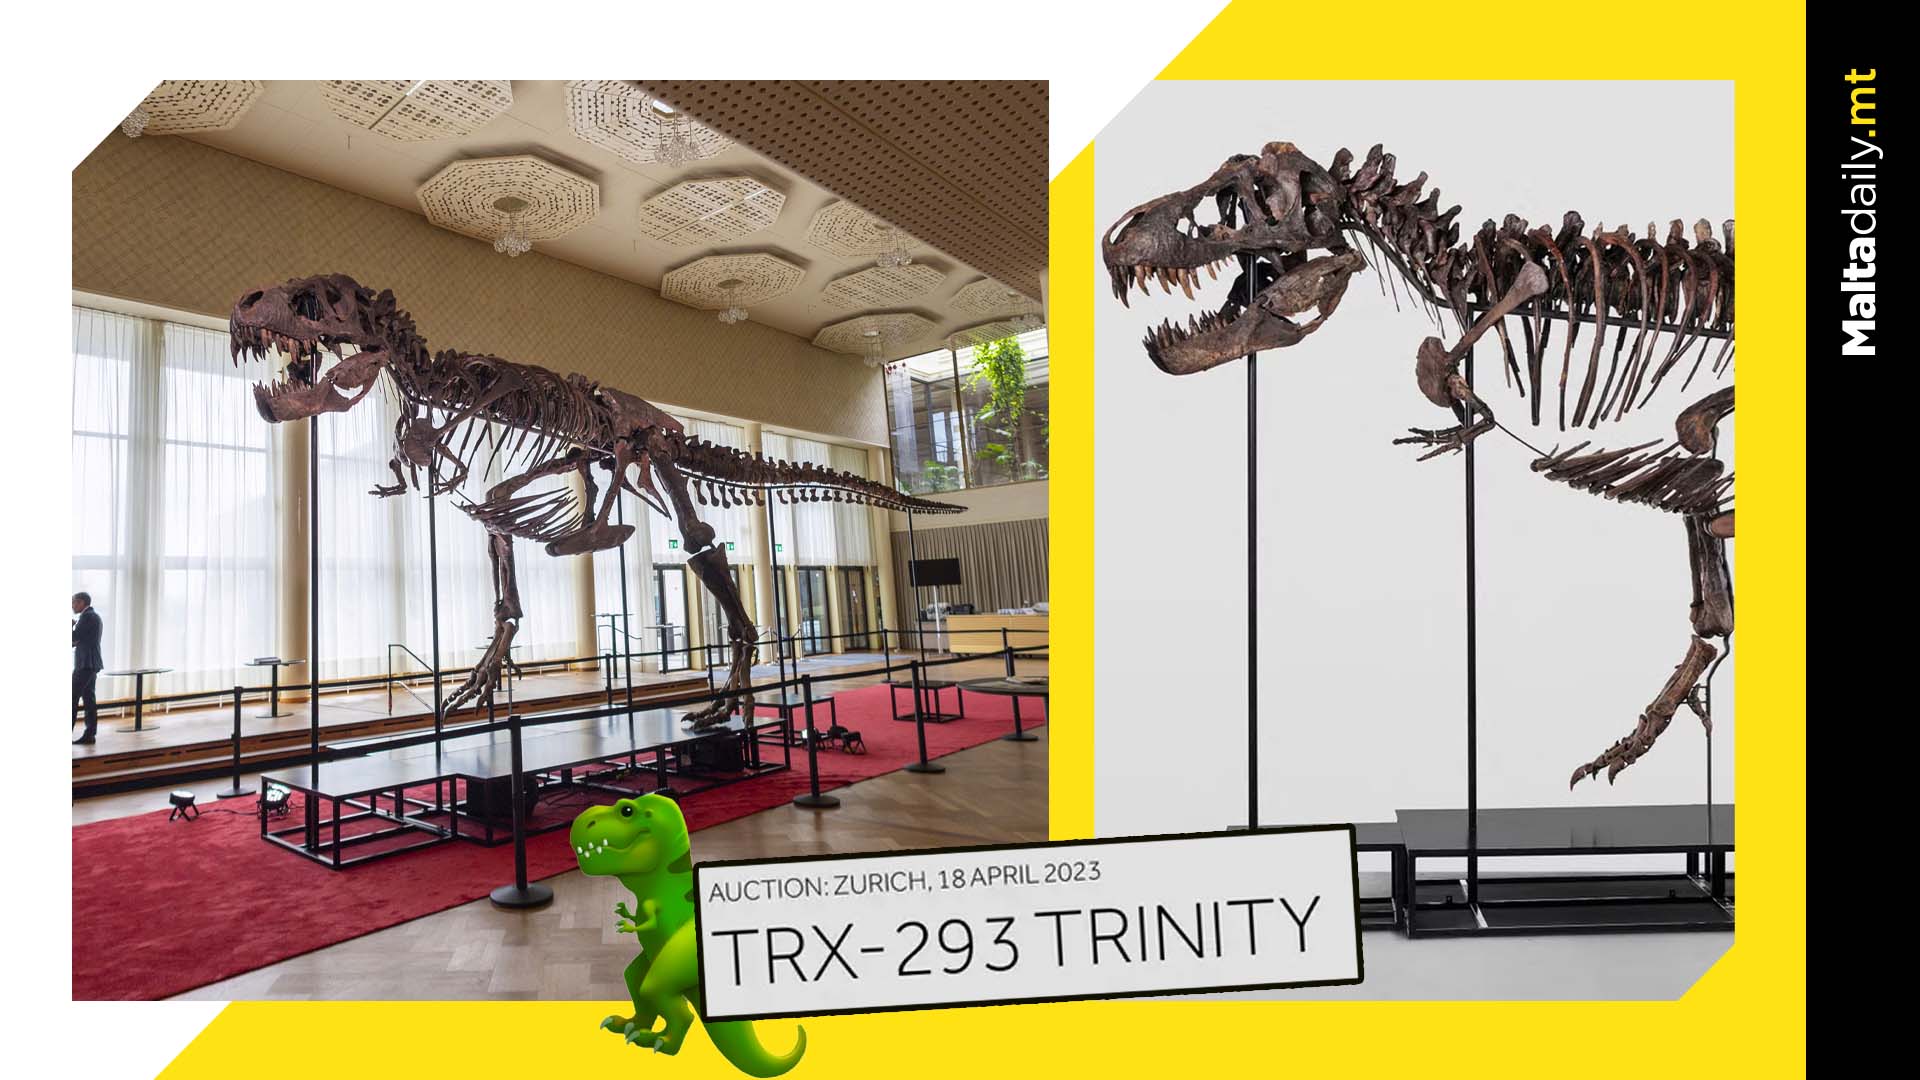 Complete T-Rex skeleton sells for $8 million at auction